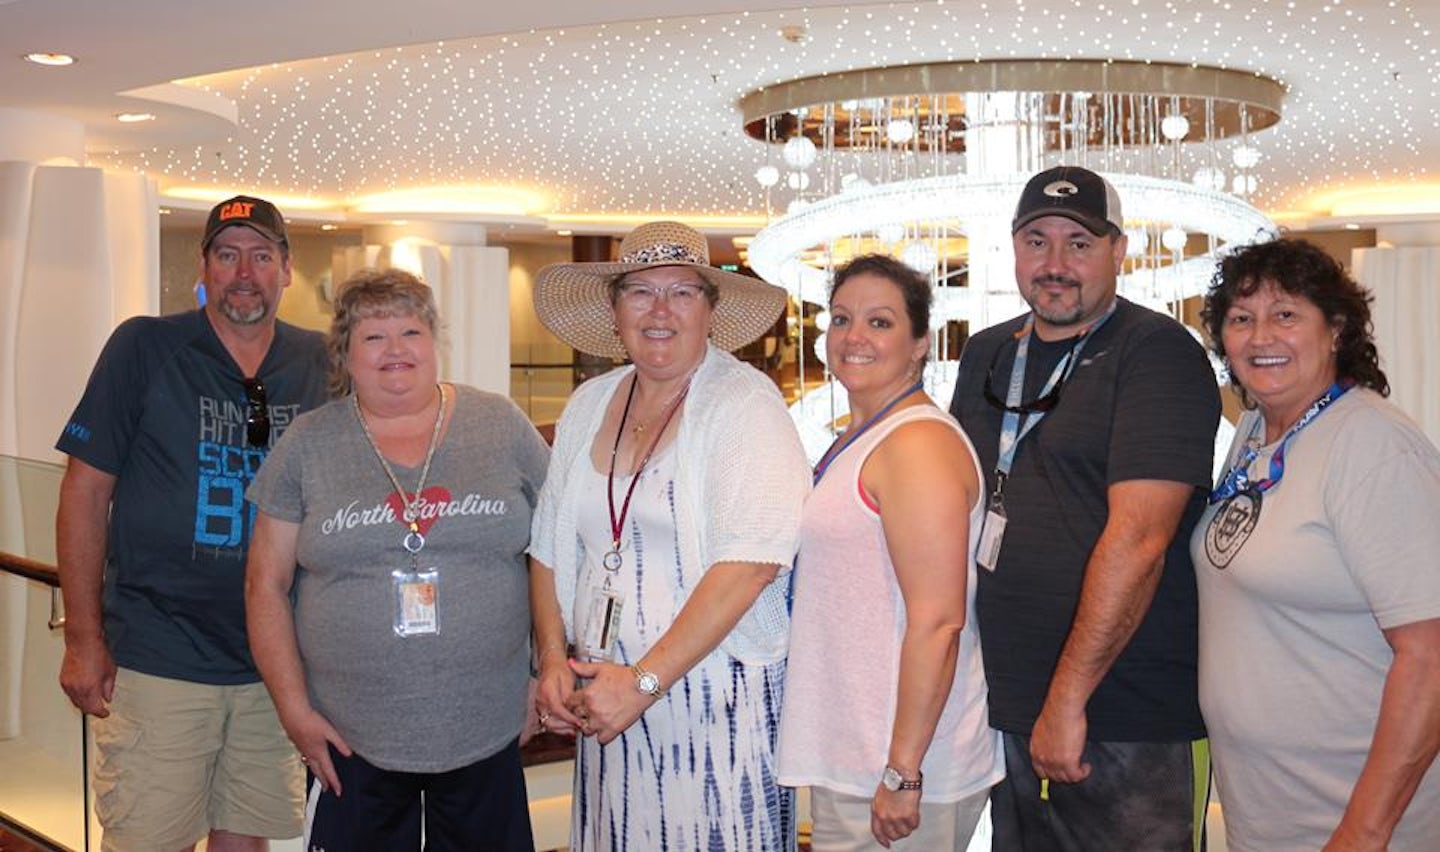 Our group in front of the chandelier in the middle of the ship